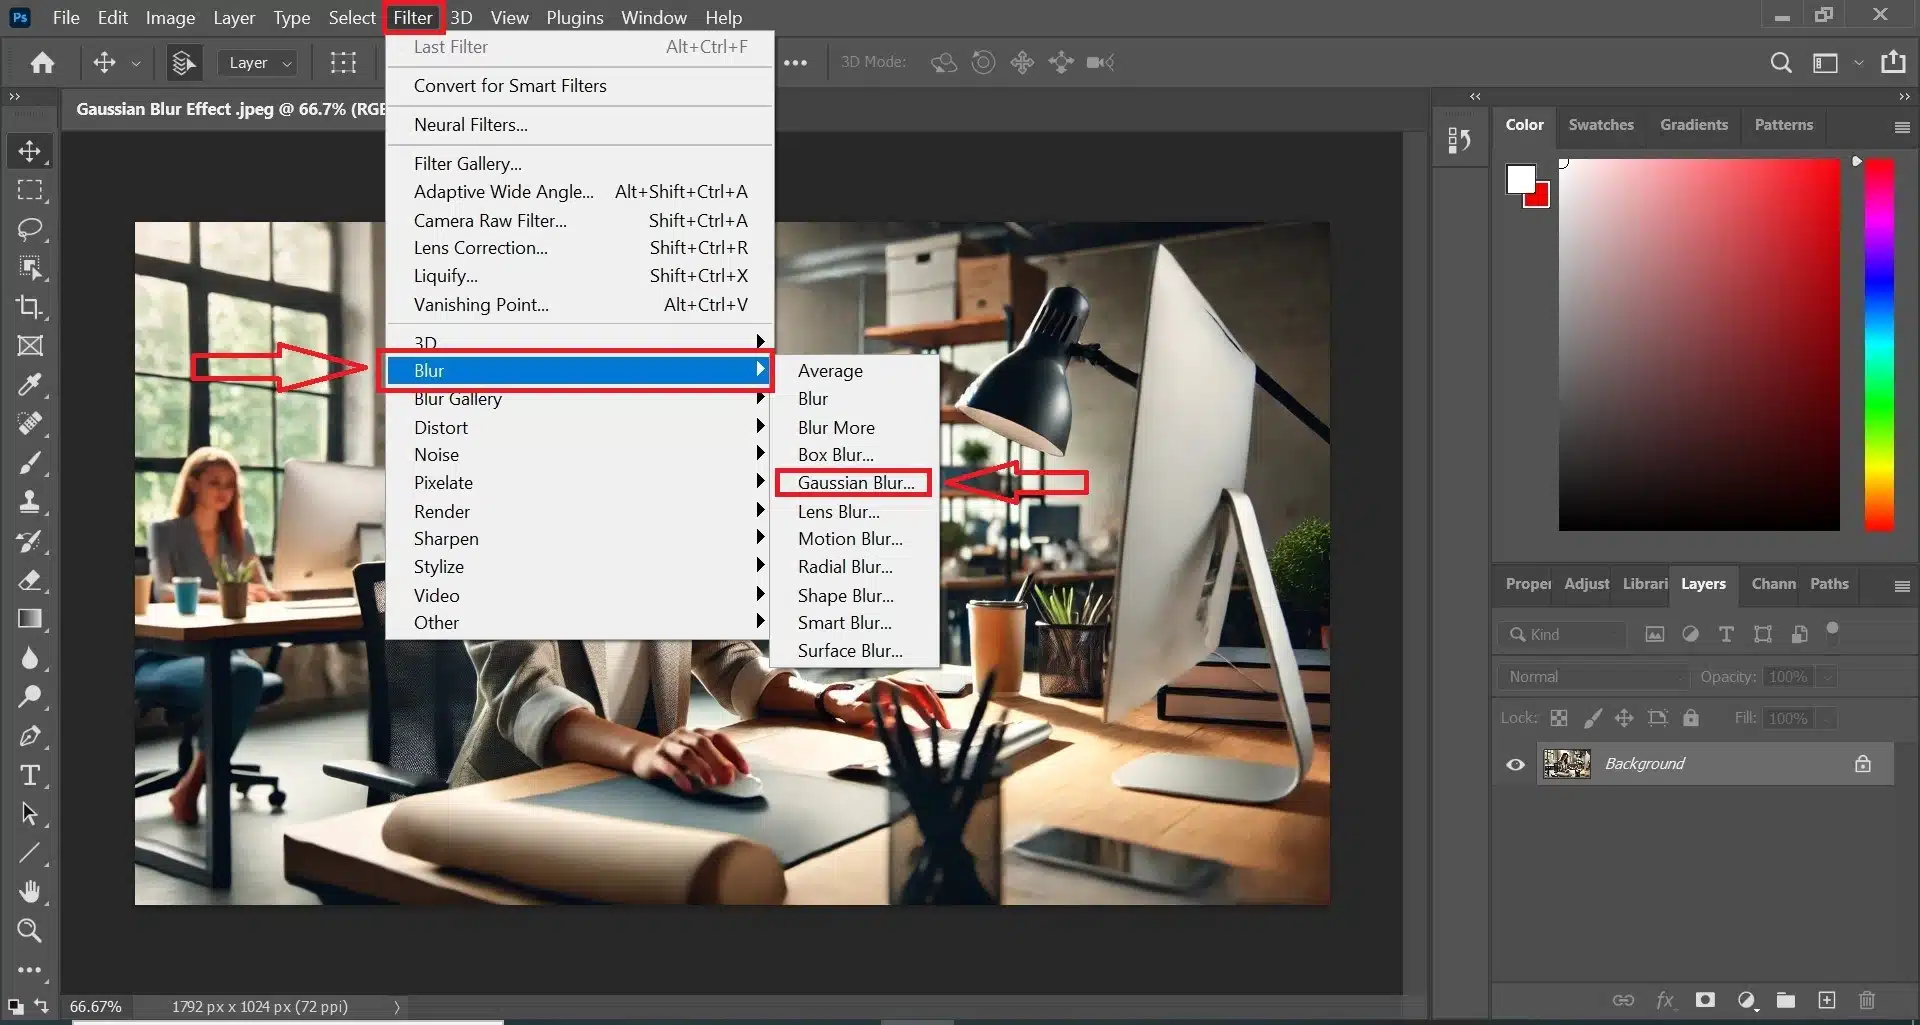 Adobe Photoshop interface showing the process of applying a Gaussian Blur. The Filter menu is open with the Blur and Gaussian Blur options highlighted. A woman is working at a desk in the background.